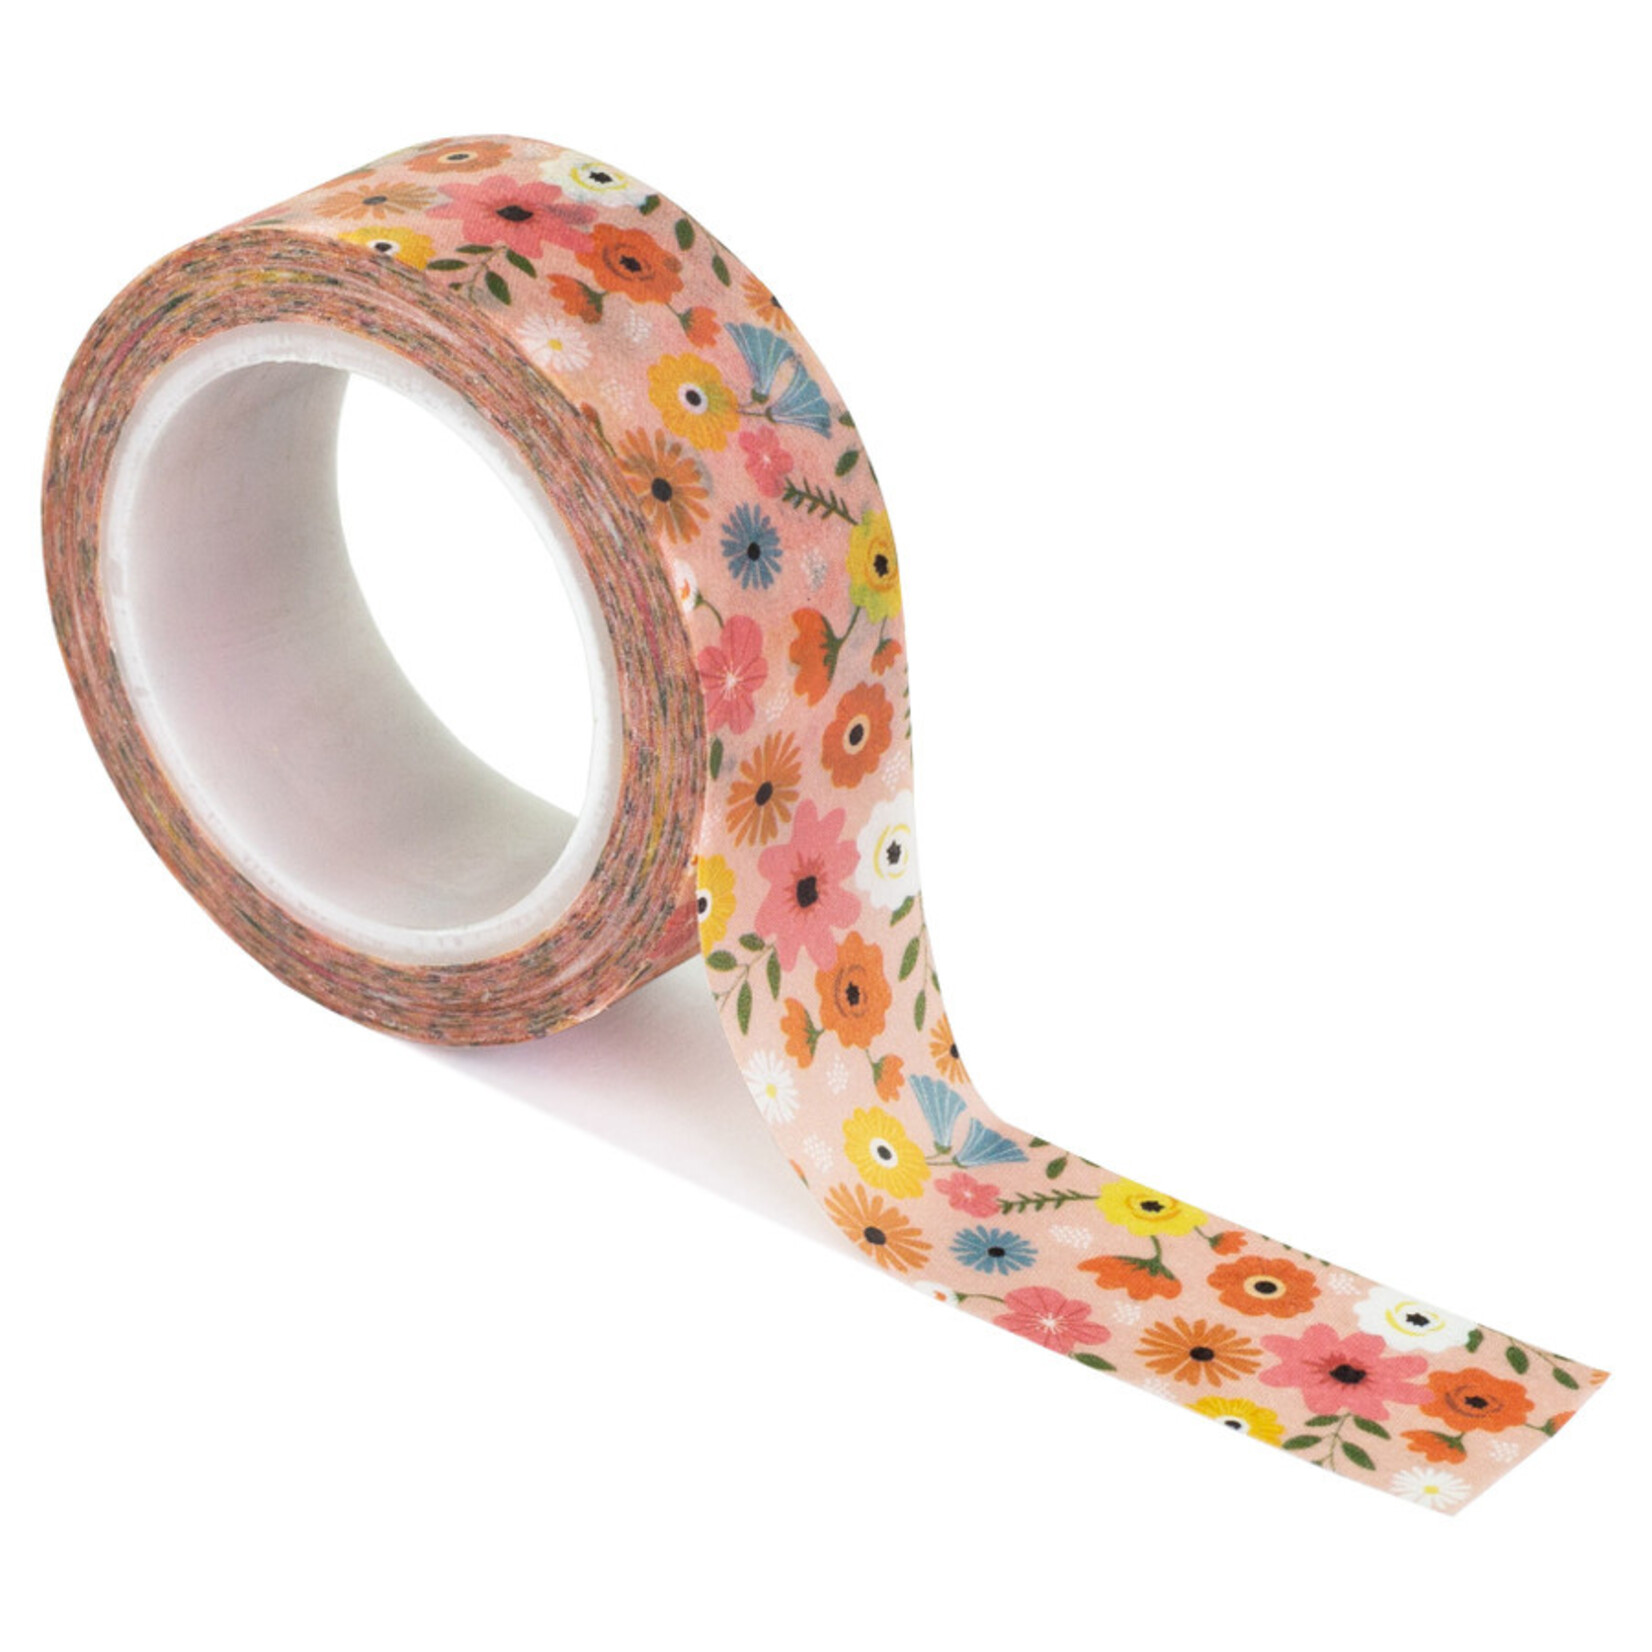 ECHO PARK PAPER WASHI TAPE 30' SUNNY FLORAL